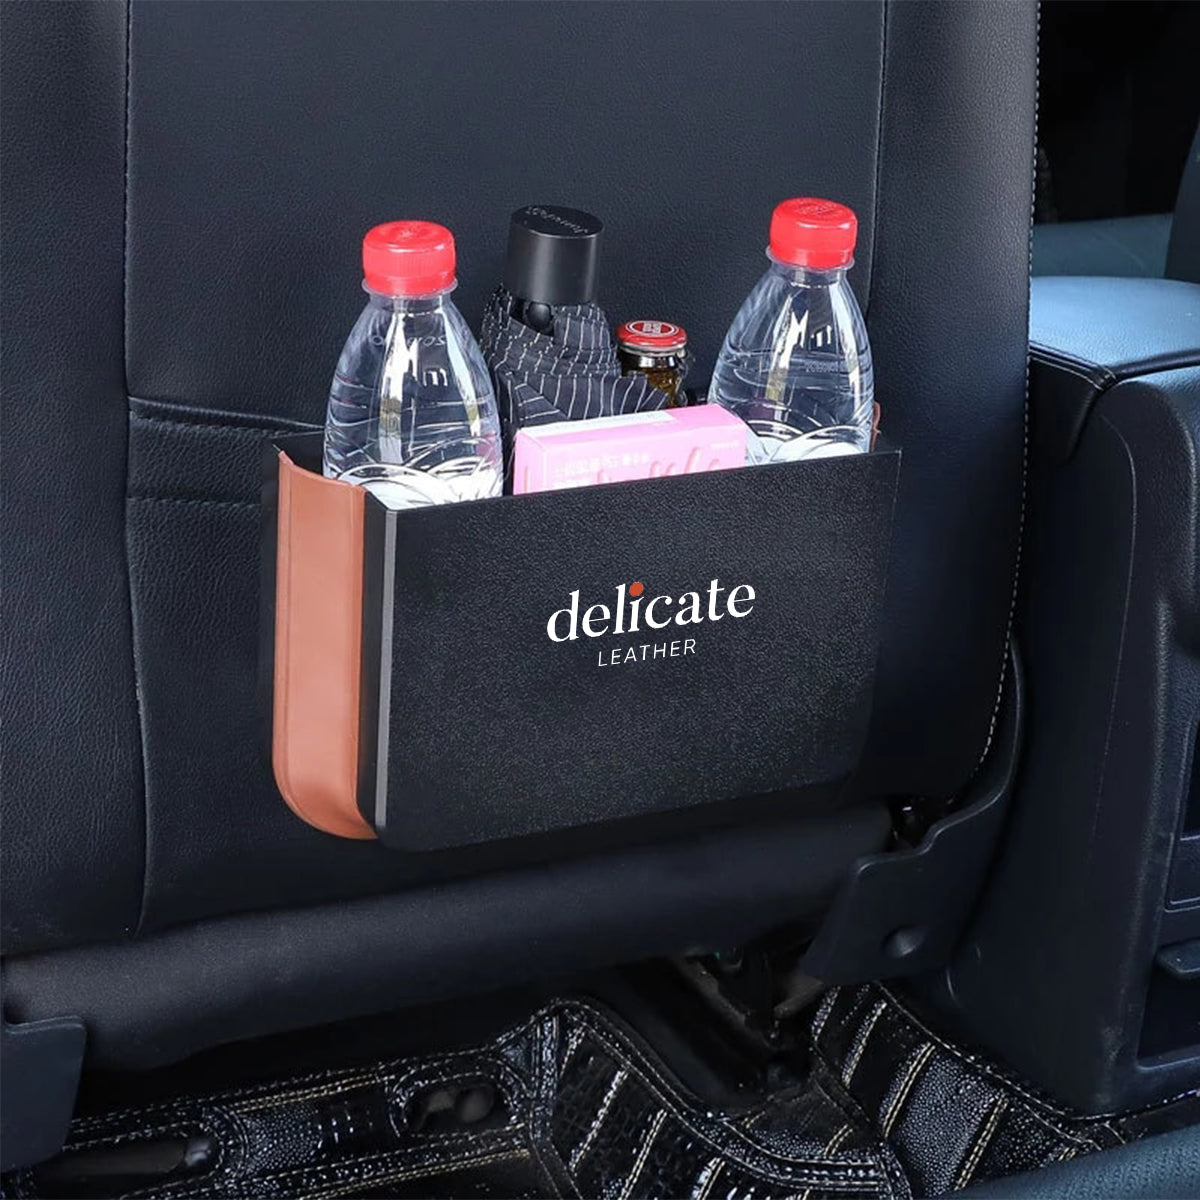 Delicate Leather Hanging Waterproof Car Trash can-Foldable, Custom For Your Cars, Waterproof, and Equipped with Cup Holders and Trays. Multi-Purpose, Car Accessories FJ11992 - Delicate Leather